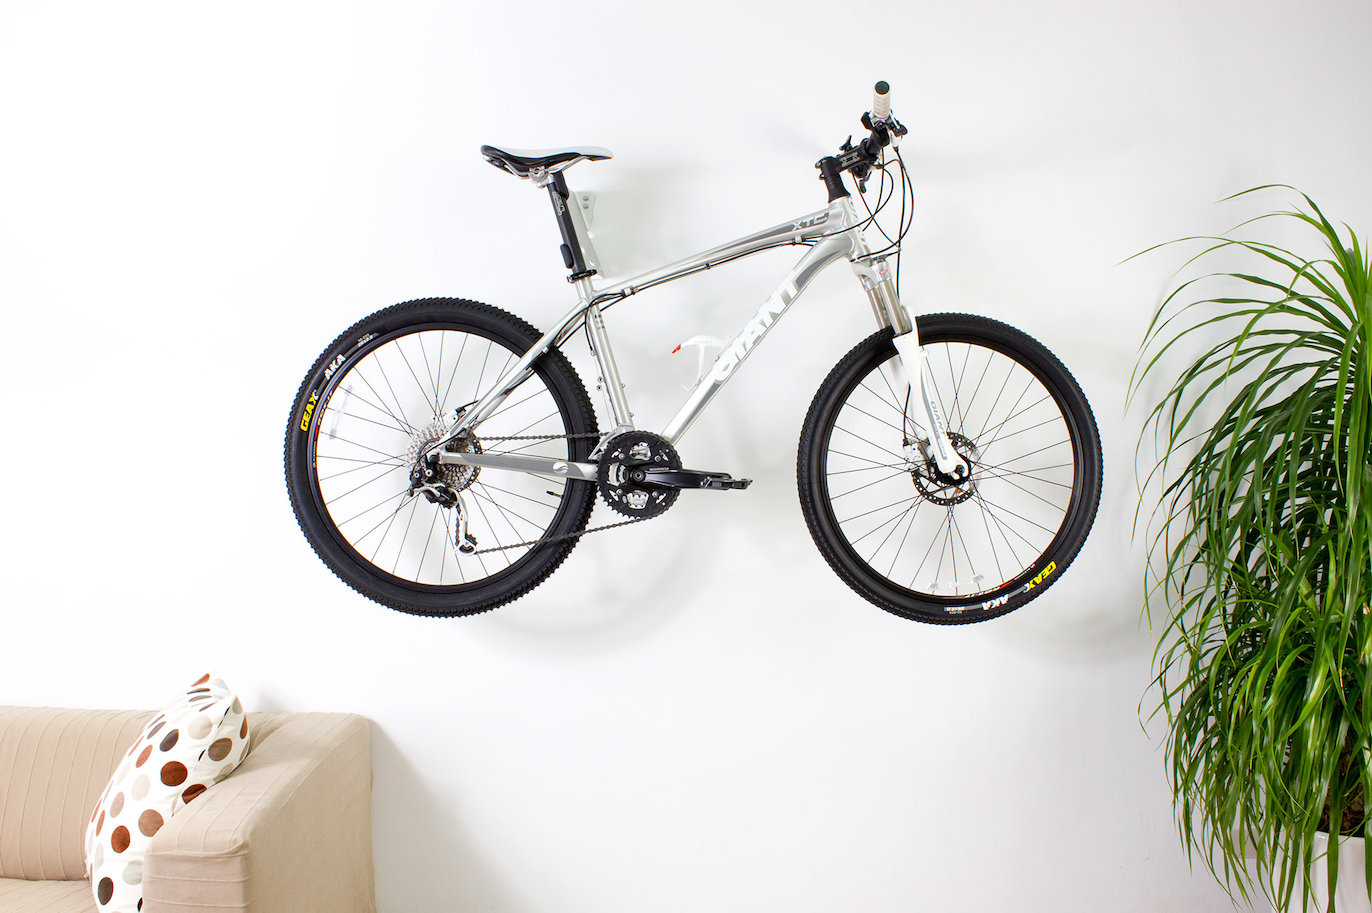 home organisation tips (4) - store bicycle on wall with invisible floating mount